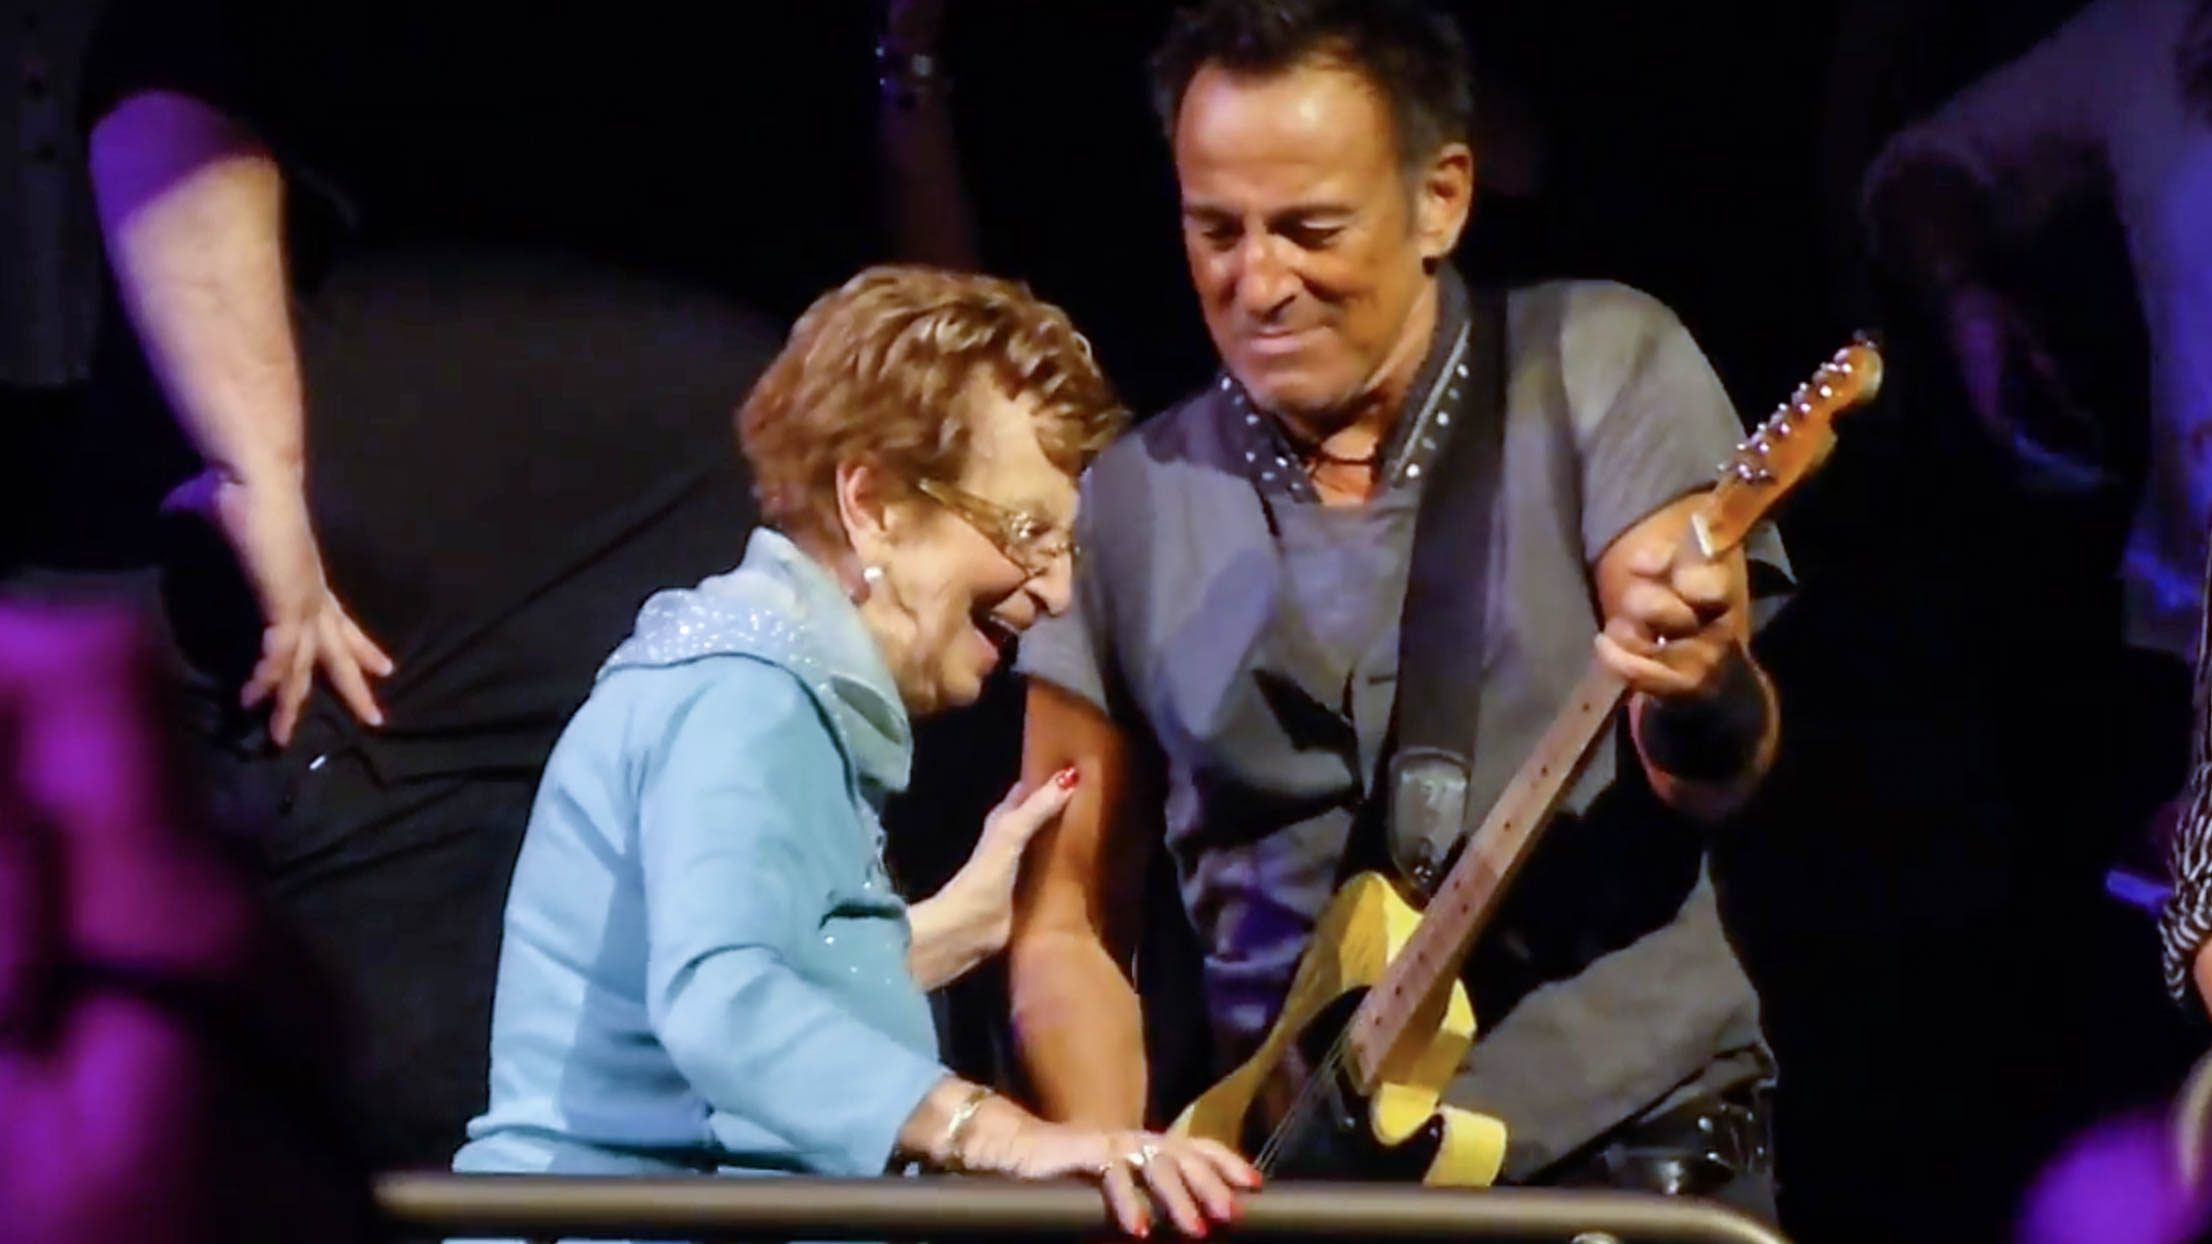 WATCH: Bruce Springsteen dances with his 90-year-old mother onstage